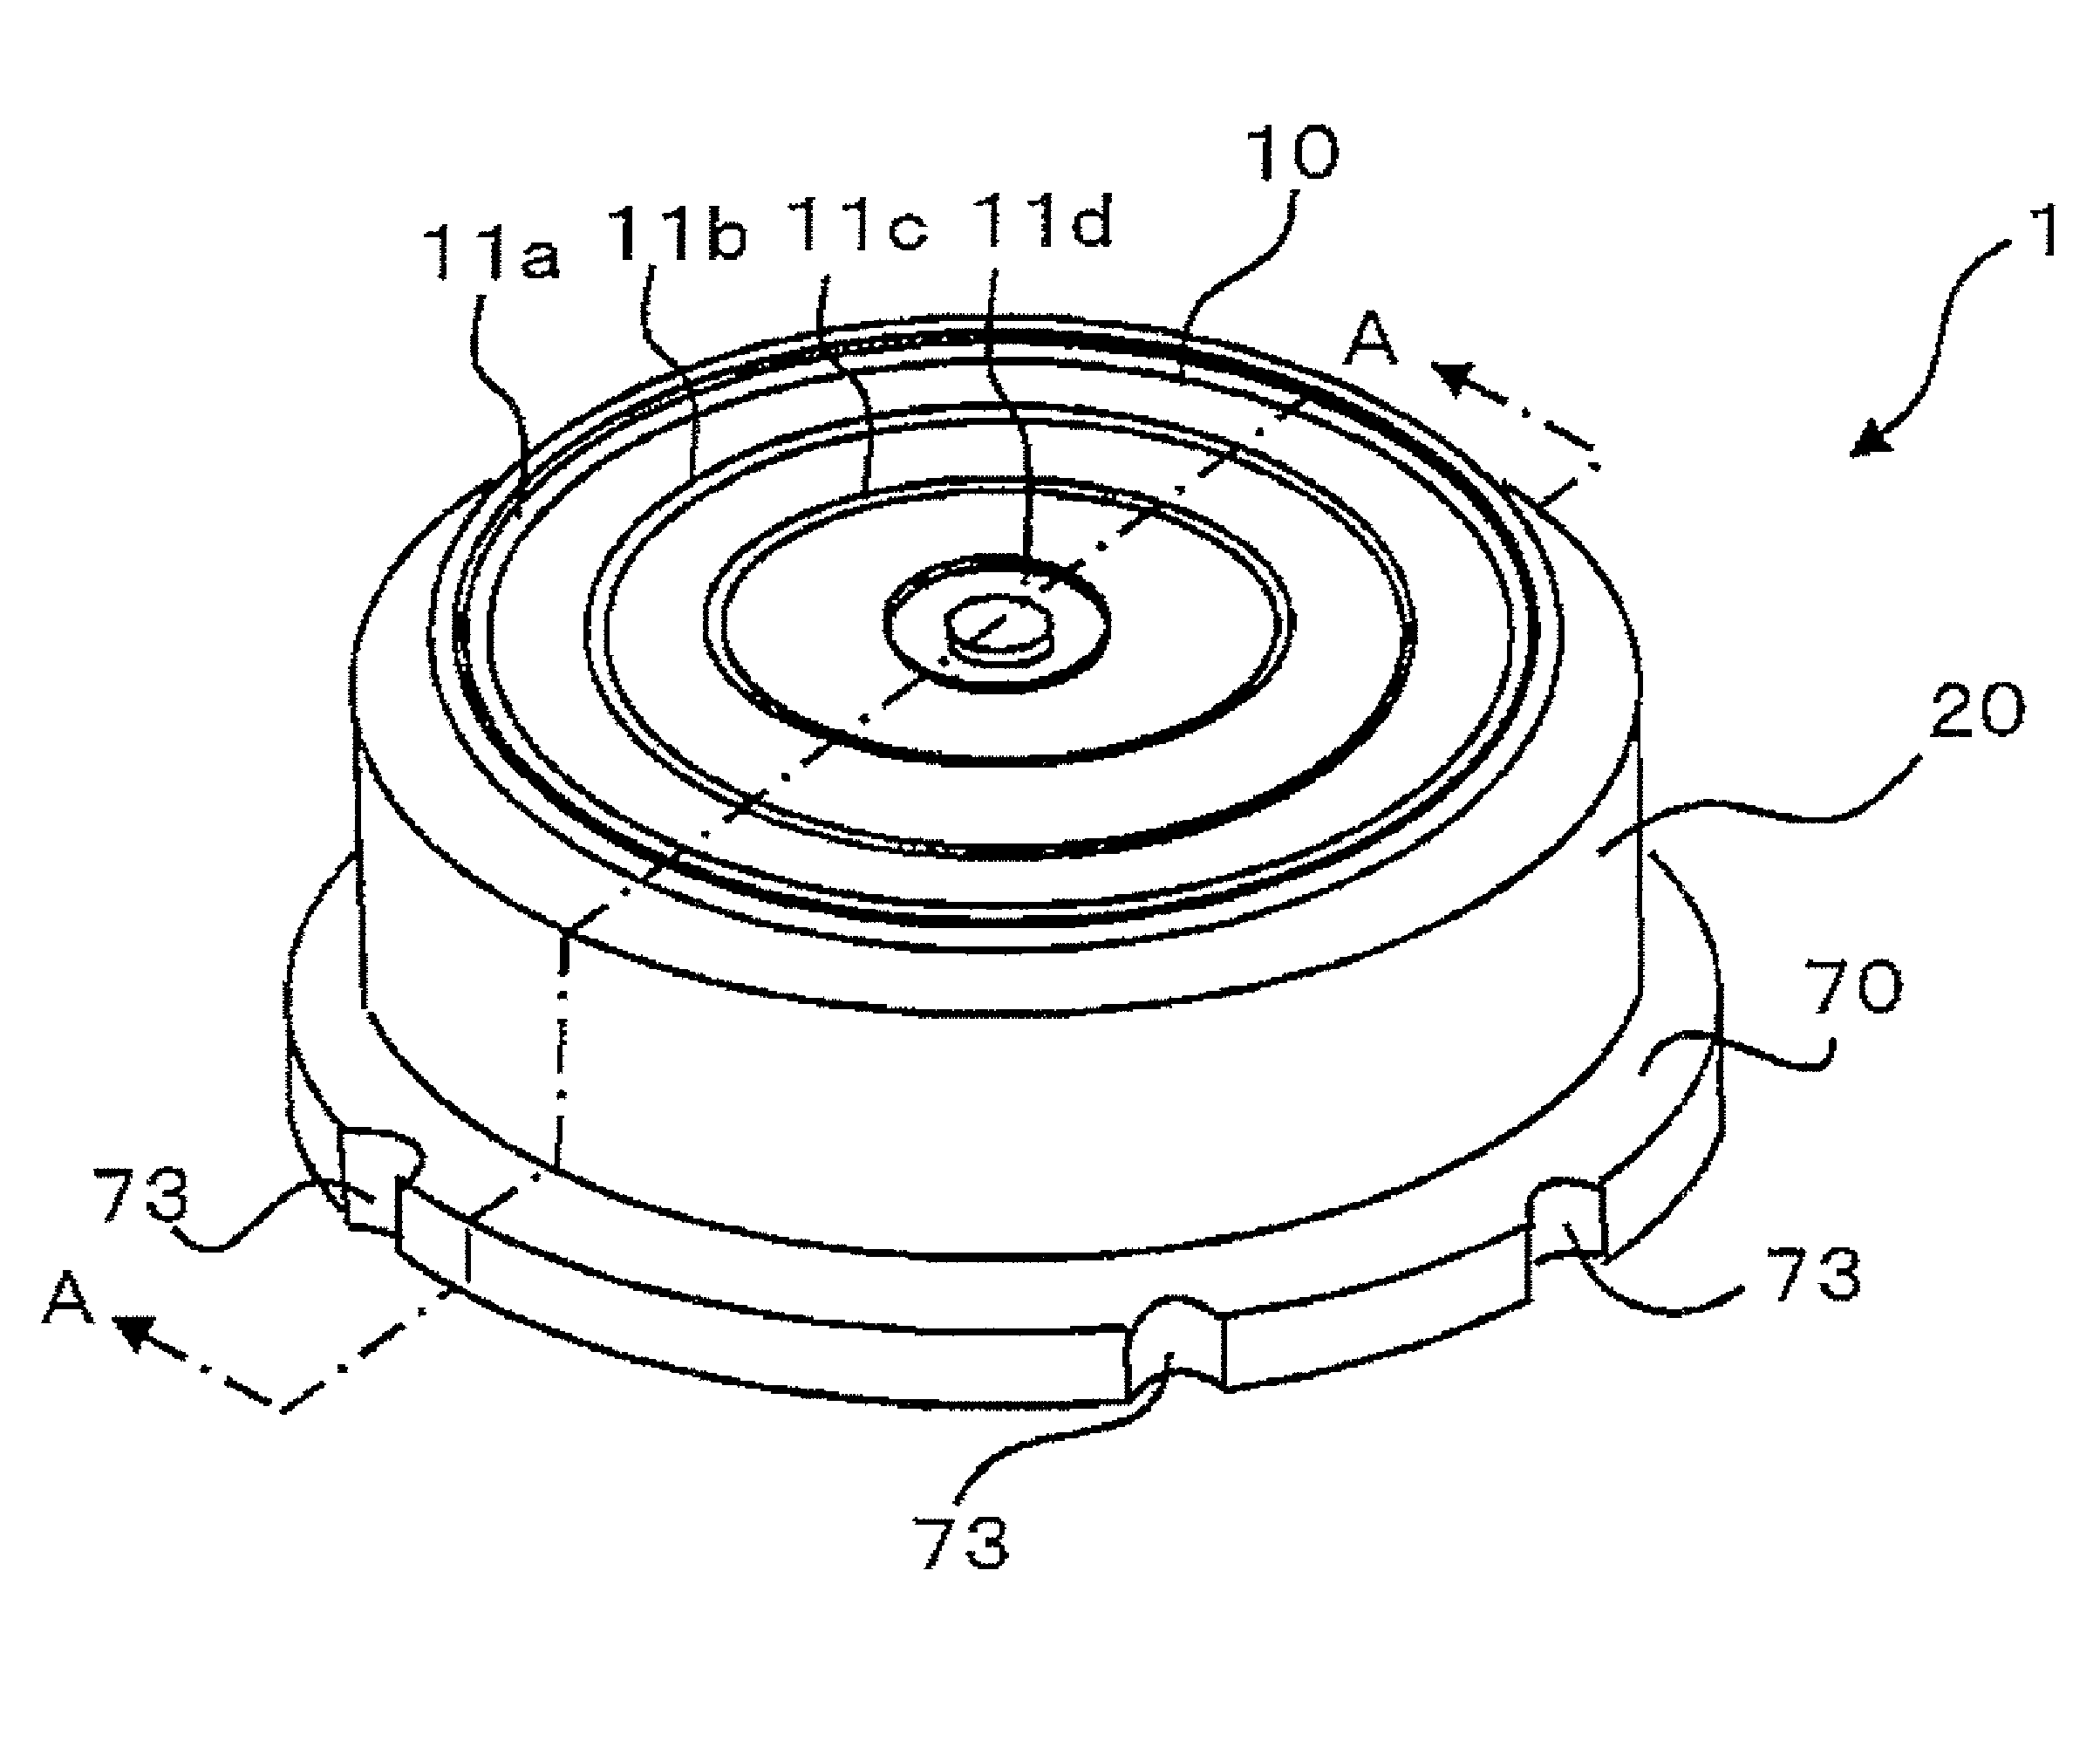 Pointing device for improved accuracy